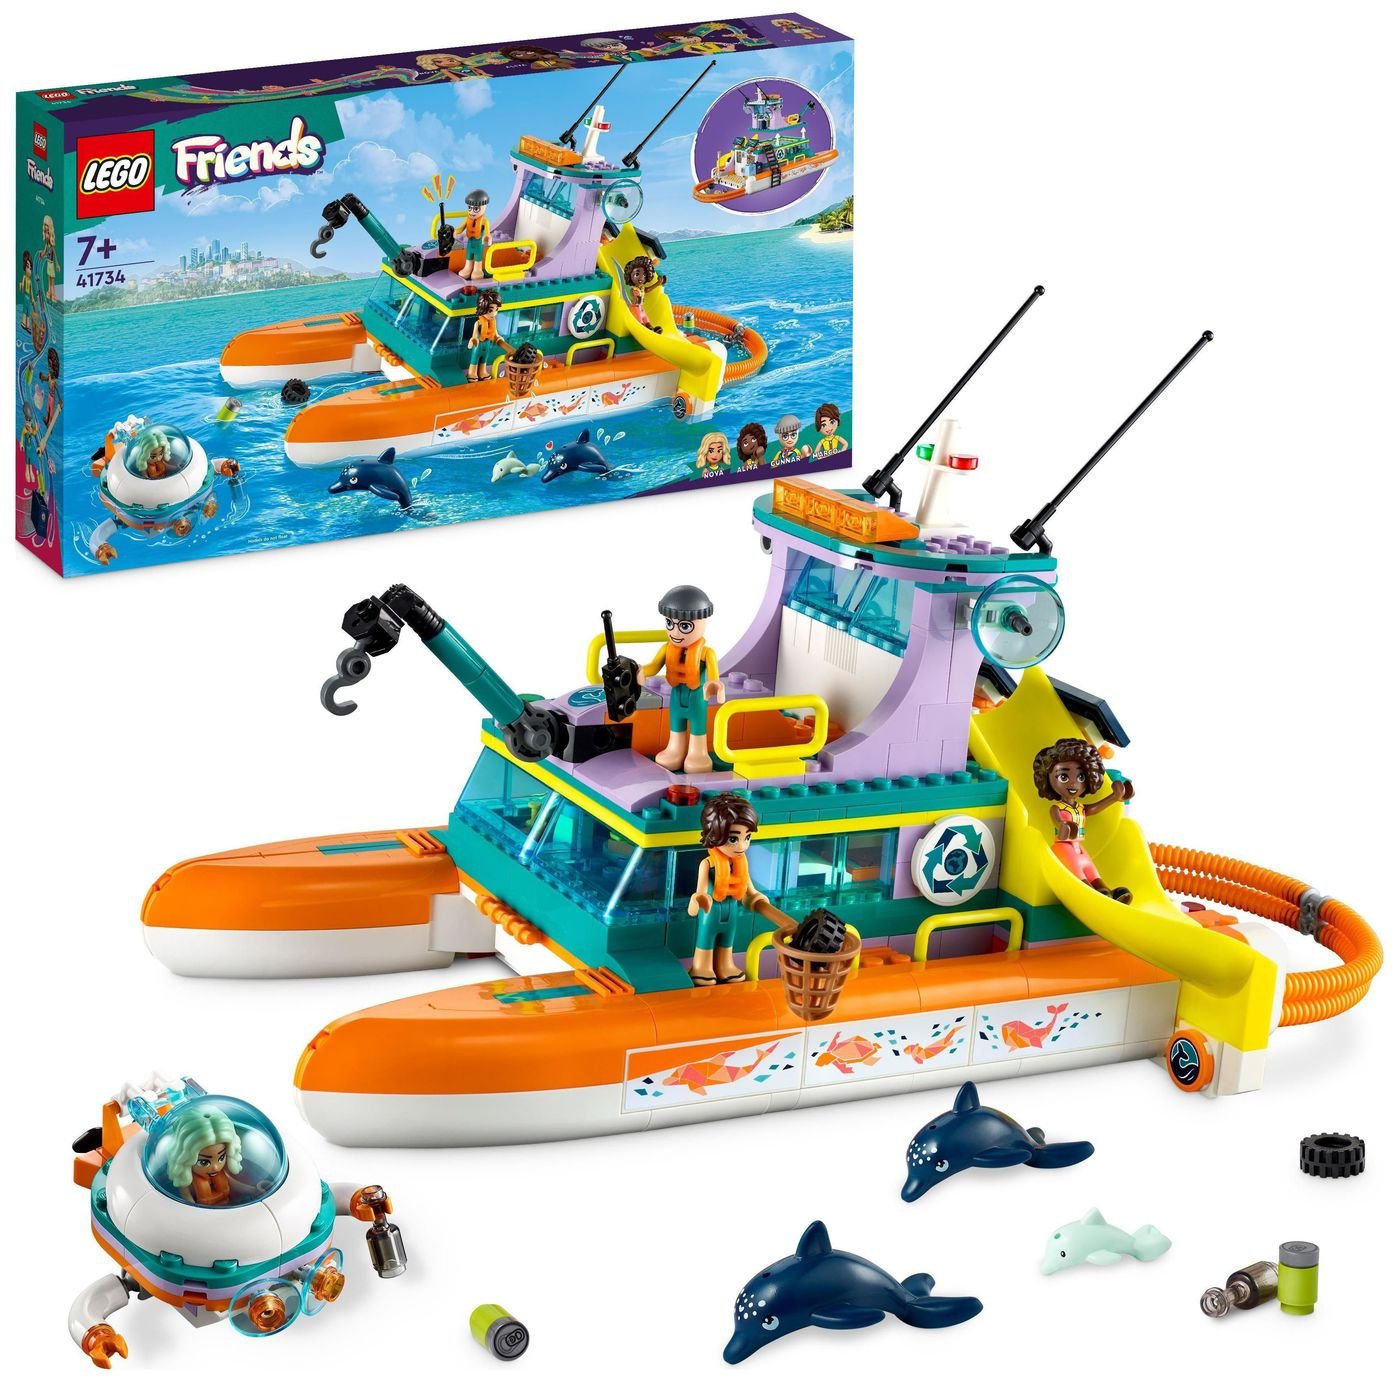 LEGO Friends Sea Rescue Boat Toy with Dolphin Figures 41734